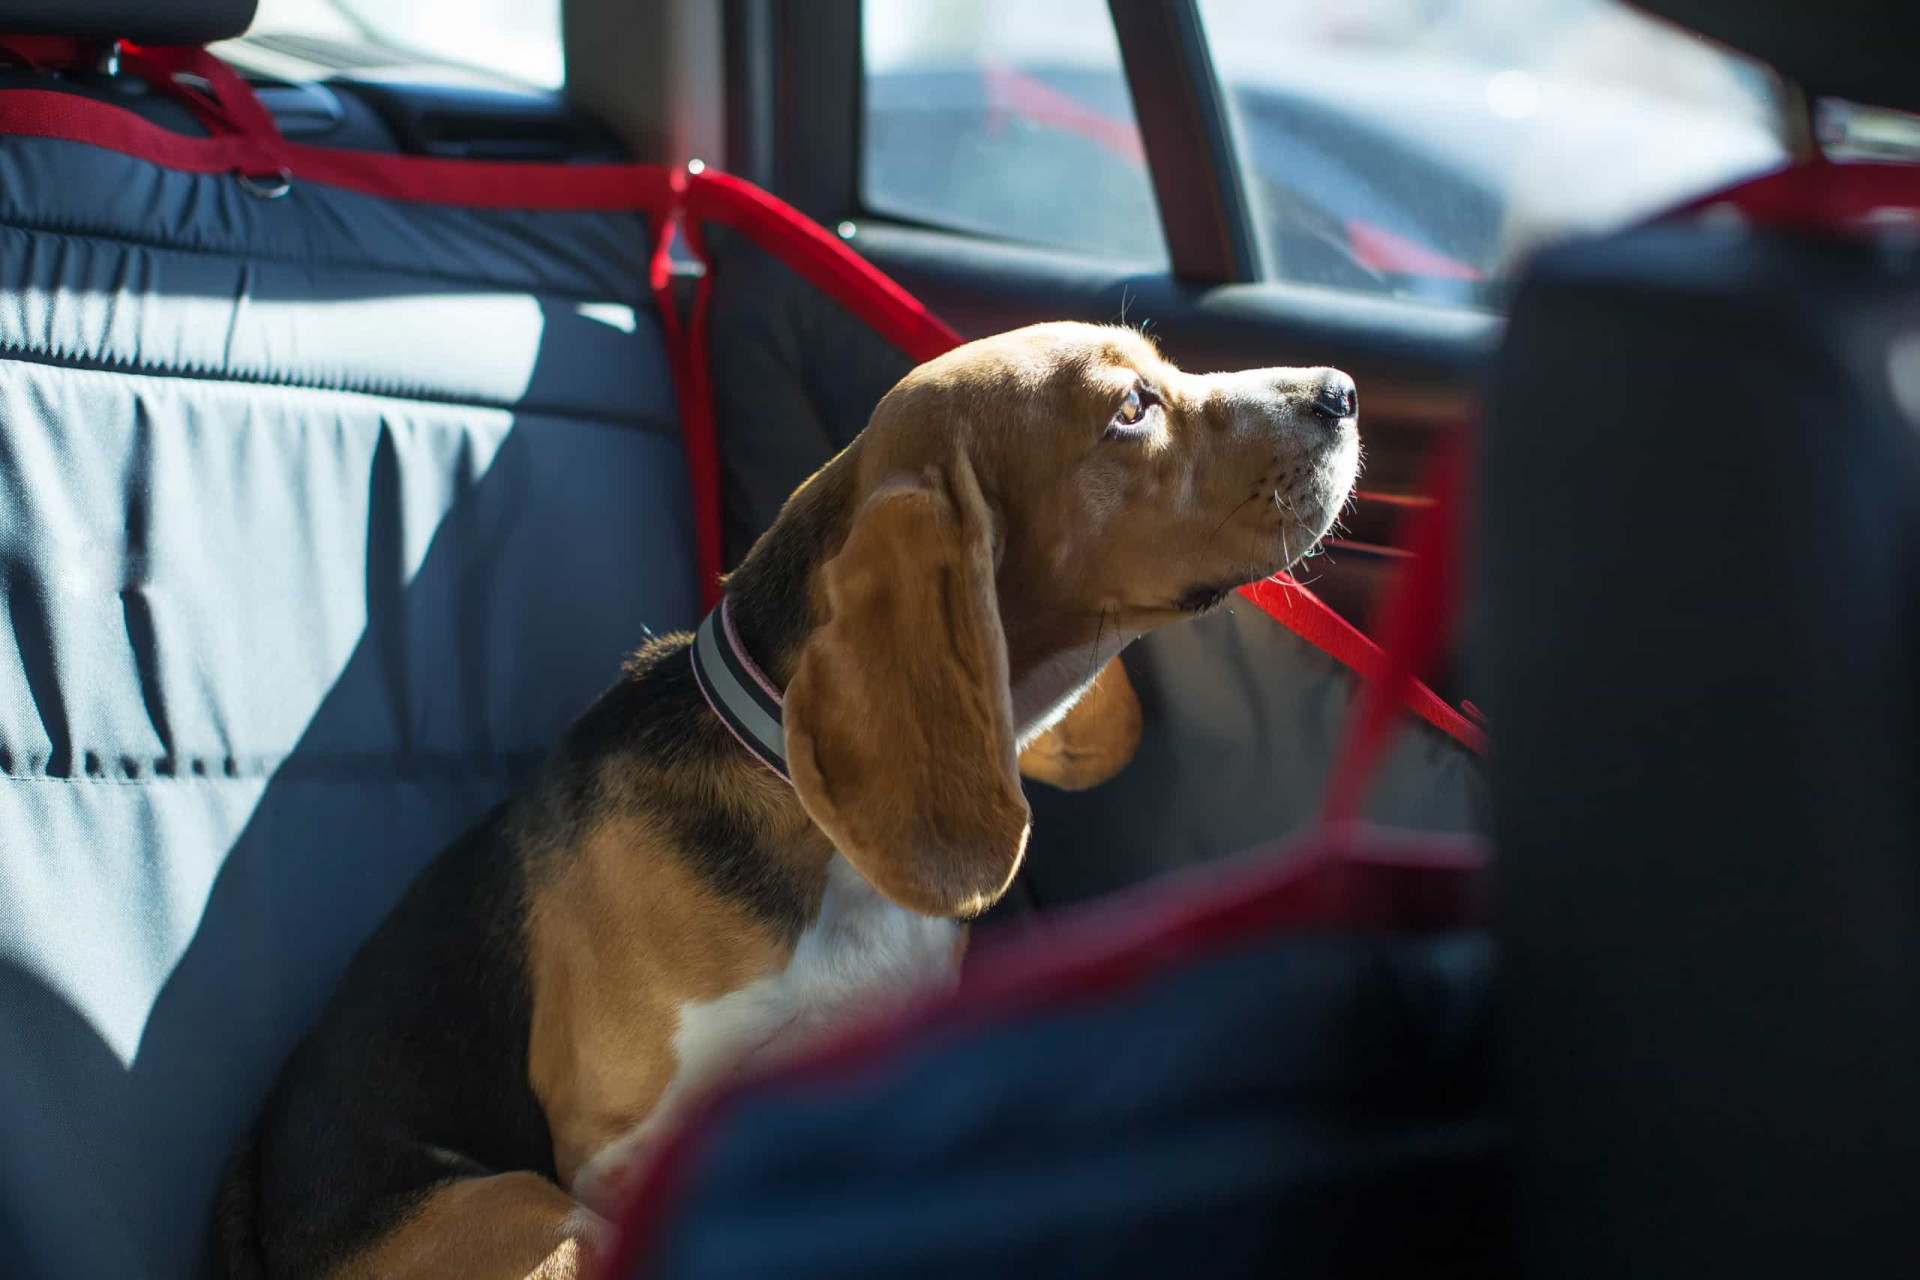 <p>It’s important that your dog is used to the car. Don’t make the animal’s first car trip a long road trip. Go for short drives first, and see your pet’s reaction to traveling by car.</p><p>You may also like:<a href="https://www.starsinsider.com/n/338149?utm_source=msn.com&utm_medium=display&utm_campaign=referral_description&utm_content=719768en-us"> Myths, truths, and fun facts about milk</a></p>